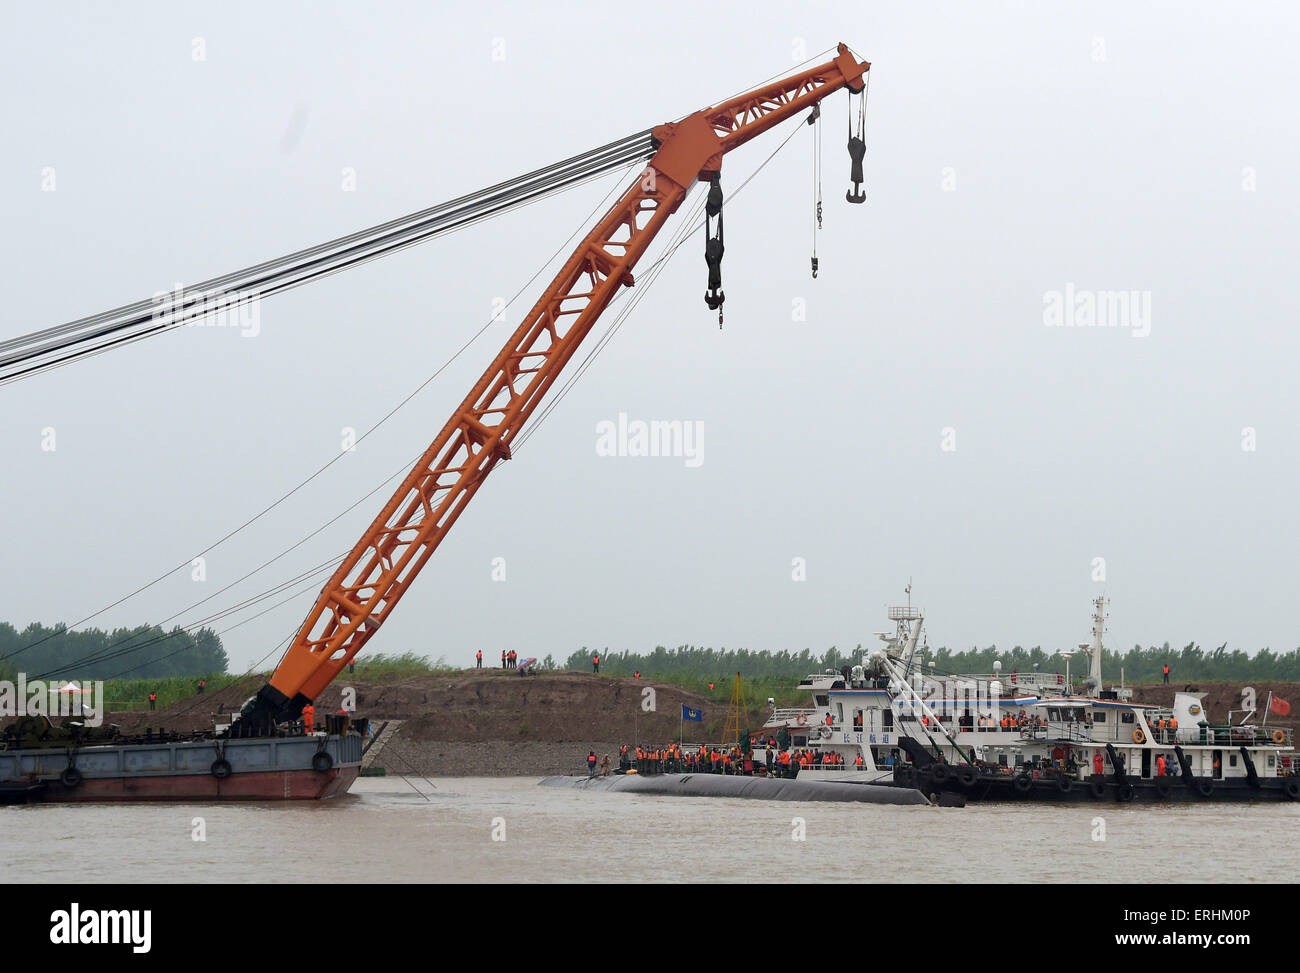 Jianli, China. 3rd June, 2015. Rescuers work at the site of the overturned ship in the Jianli section of the Yangtze River, central China's Hubei Province. As of Tuesday night, 14 people had been rescued, with seven others confirmed dead and about 430 missing in what could be the worst shipping disaster for nearly seven decades. More than 4,600 rescuers, including hundreds of divers, battled bad weather on Tuesday as they searched for the missing passengers, many of them elderly tourists. Credit:  Xinhua/Alamy Live News Stock Photo